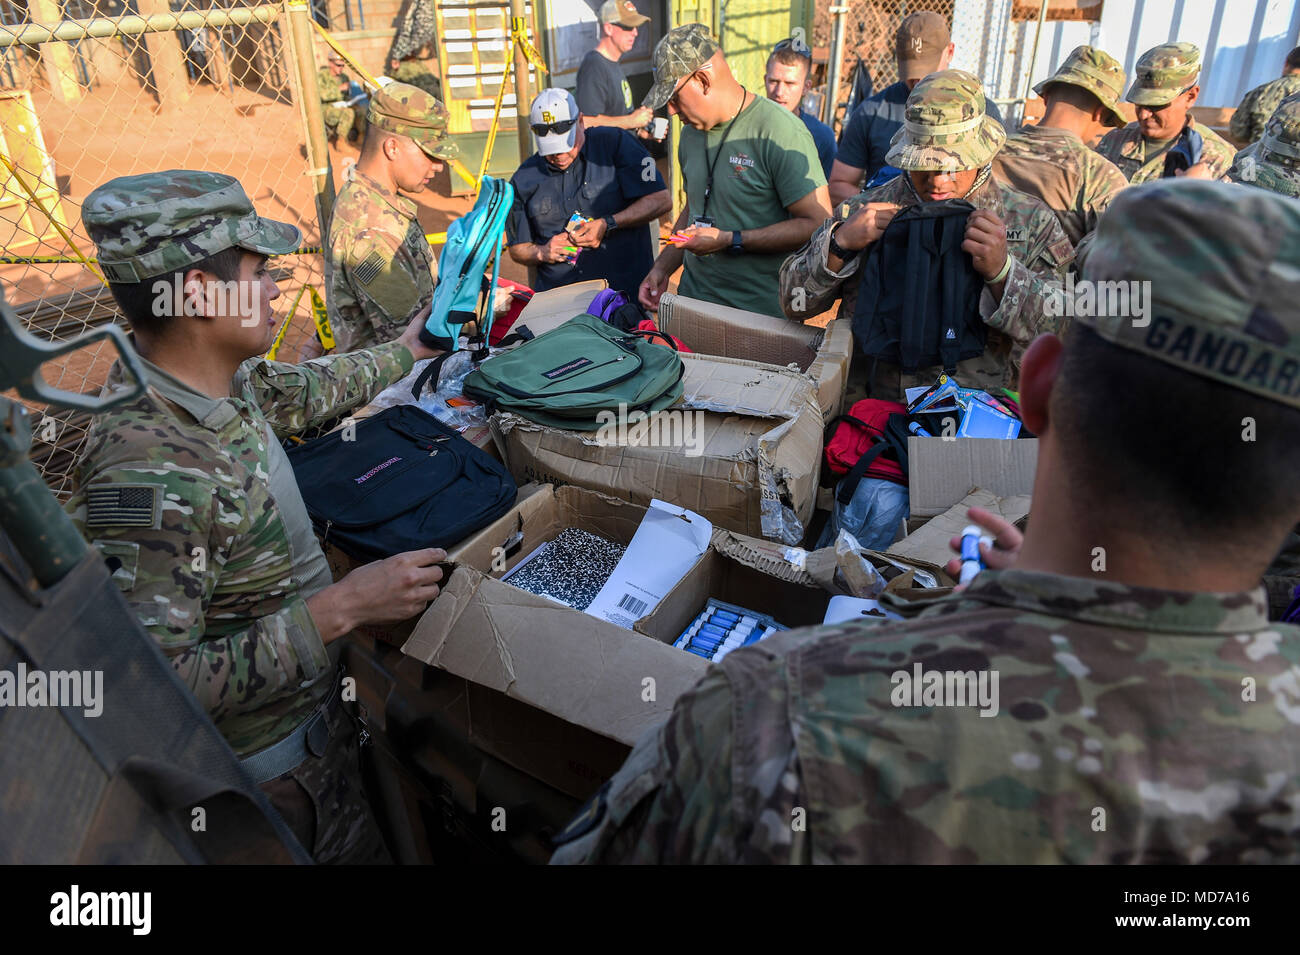 U.S. Army Soldiers with Animal Company, 3rd Battalion, 141st Infantry Regiment, assigned to Combined Joint Task Force - Horn of Africa (CJTF-HOA) put school supplies into backpacks to be given to Somali children in Ali Oune, Djibouti, March 28, 2018. CJTF-HOA service members donated more than $400 of school supplies and sandals to Somali refugees in Djibouti. (U.S. Air Force photo by Staff Sgt. Timothy Moore) Stock Photo